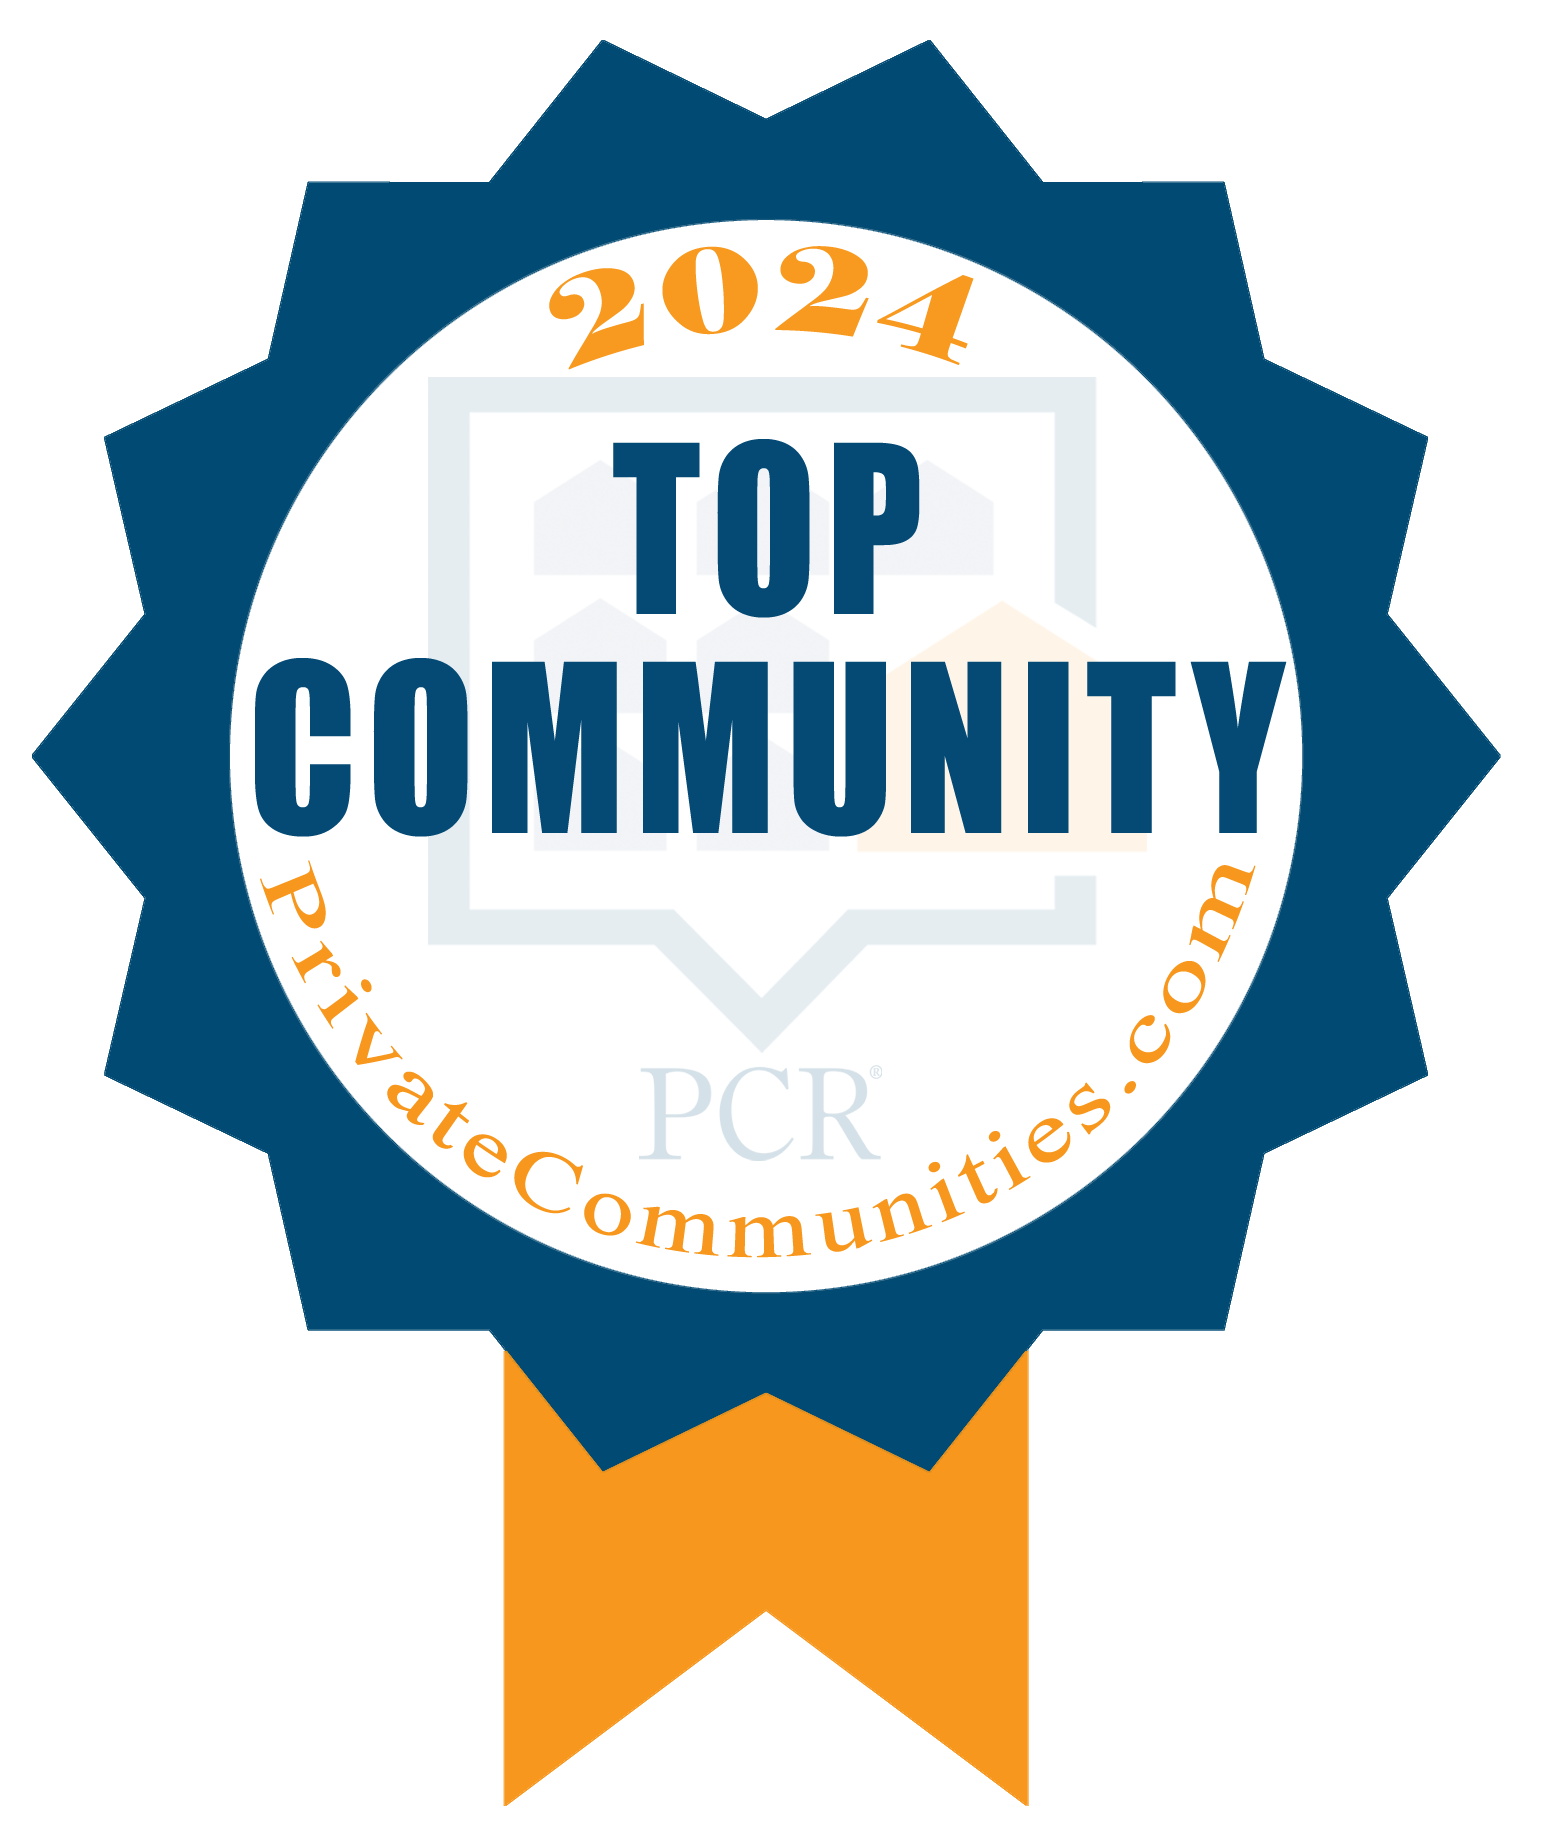 On Top of the World Communities named a Top Community by PrivateCommunities.com for 2024